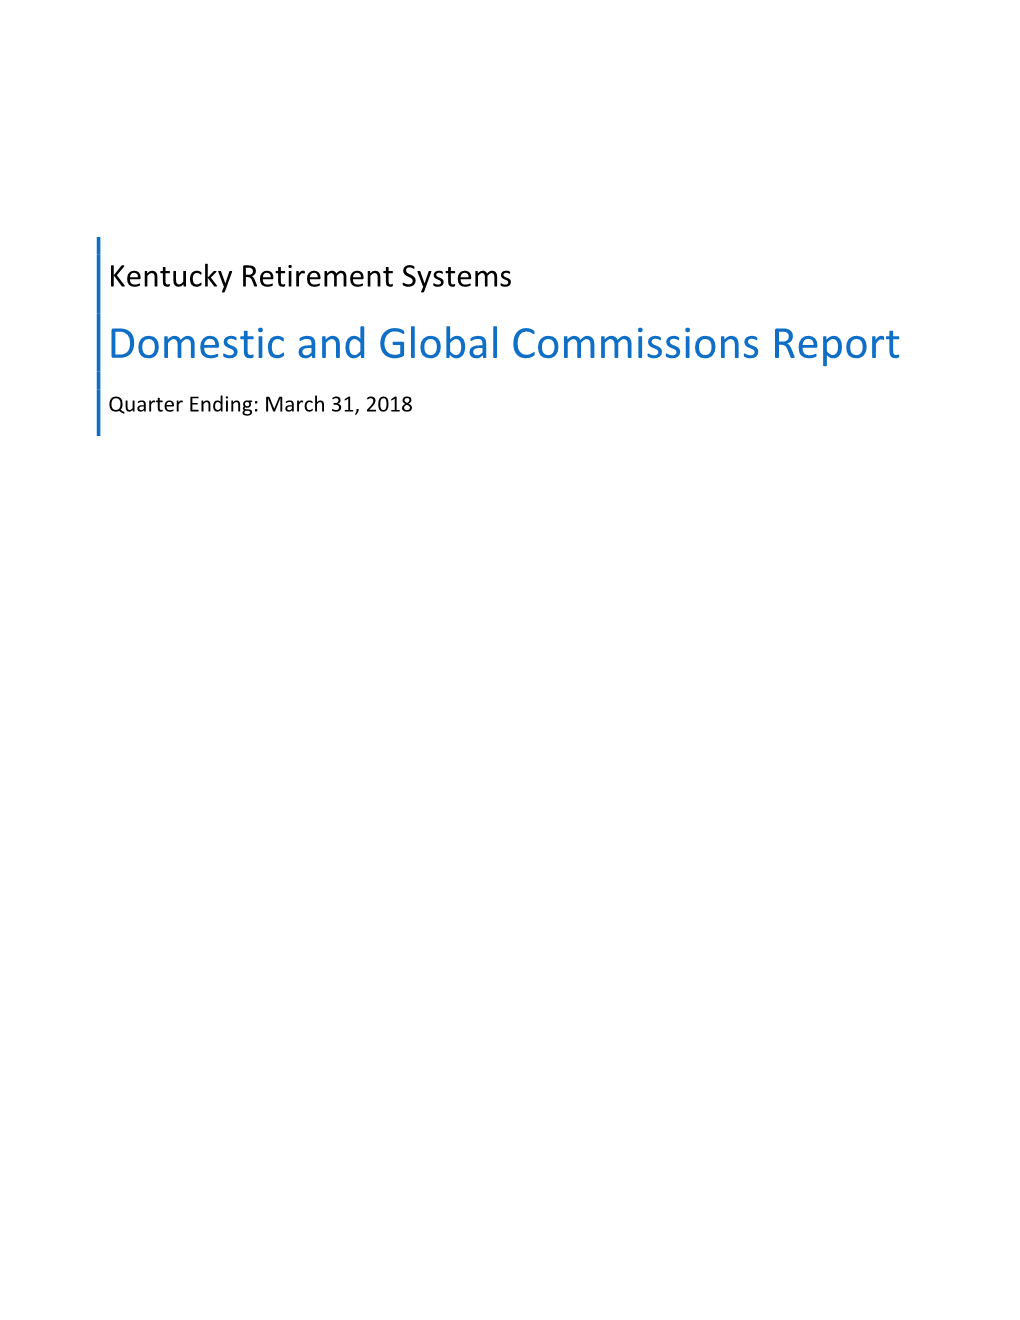 Domestic and Global Commissions Report